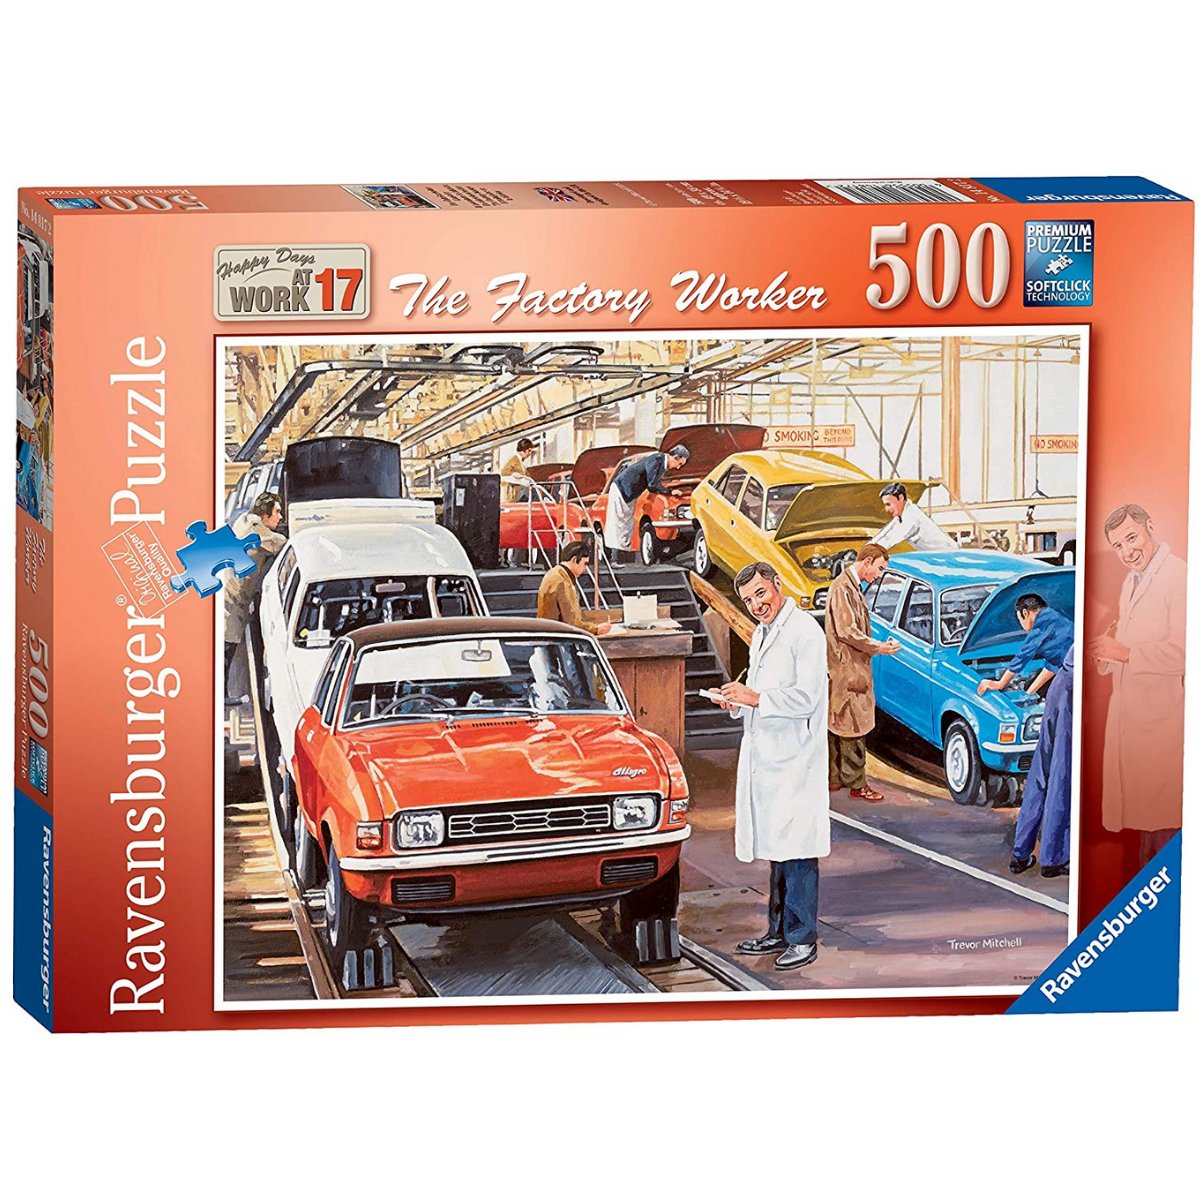 Ravensburger Happy Days at Work No.17 - The Factory Worker 500 Piece Jigsaw Puzzle - Phillips Hobbies